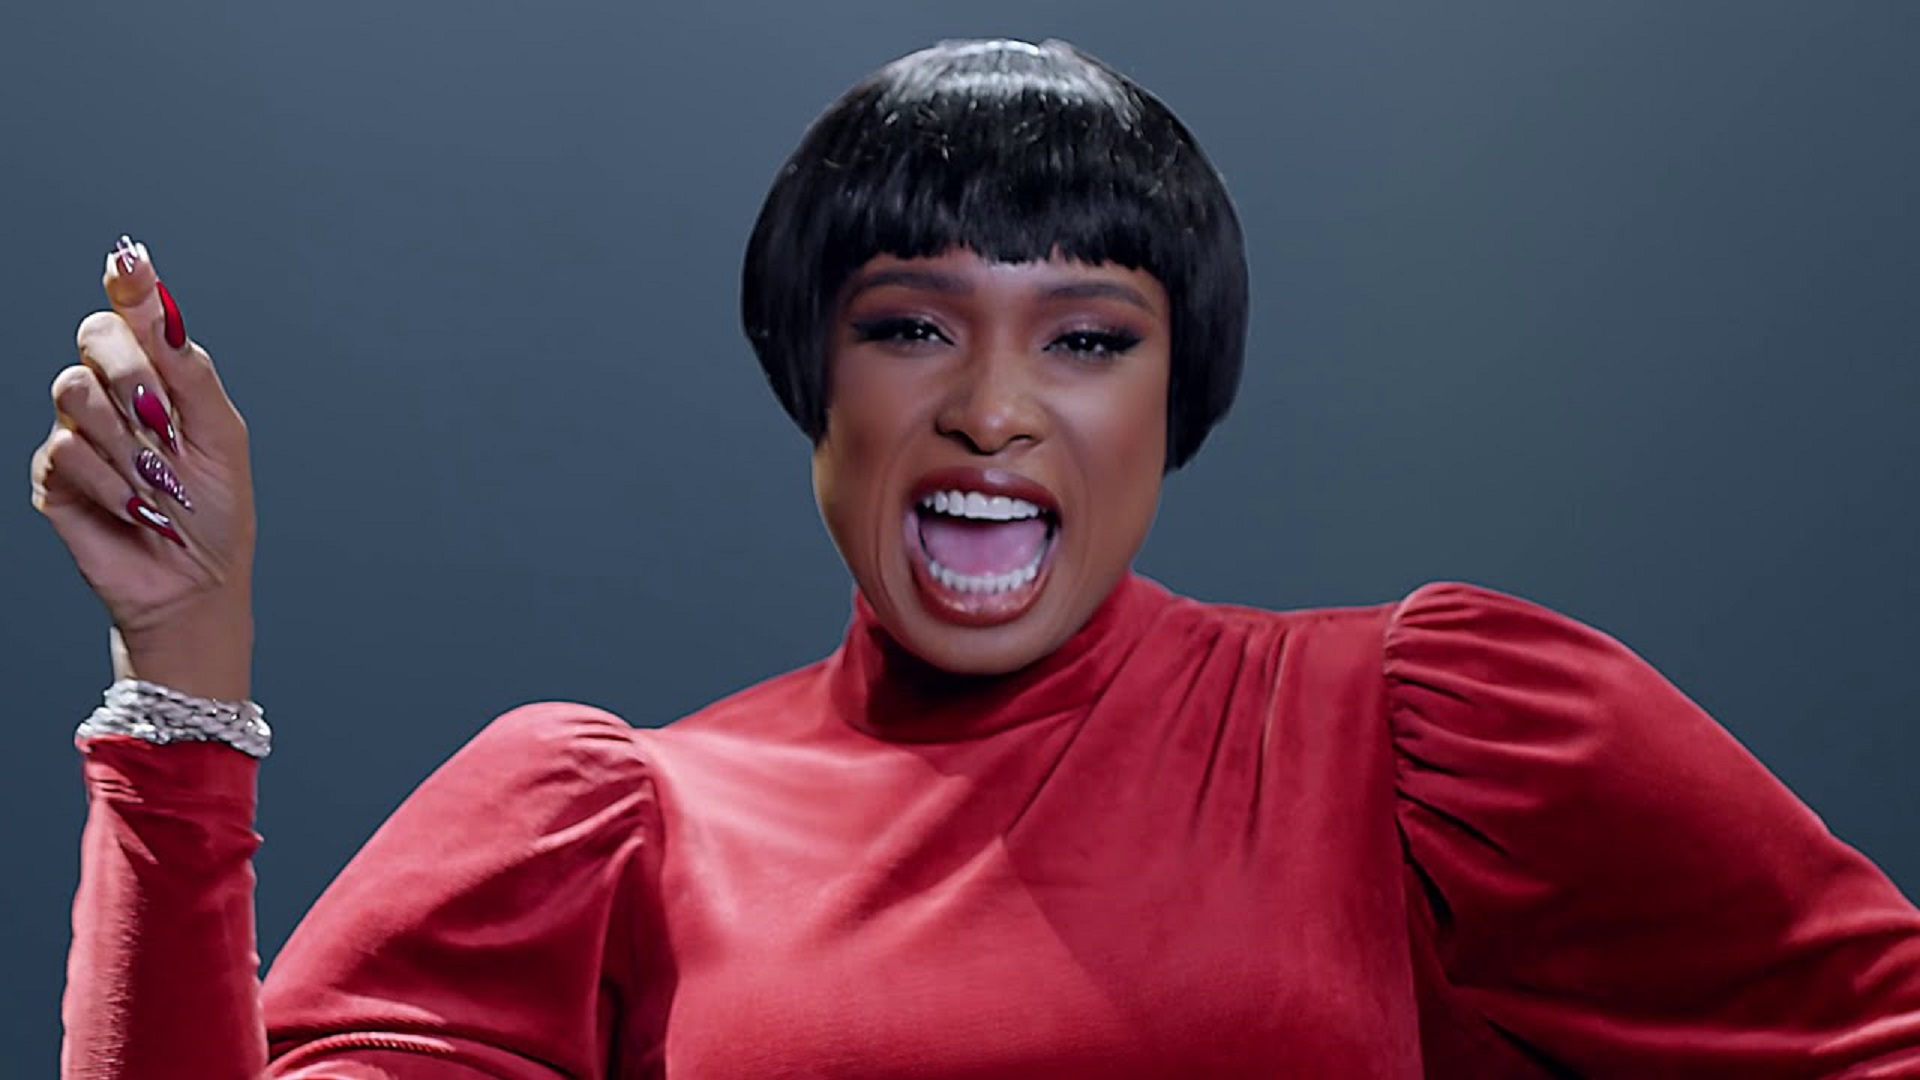 Watch: Jennifer Hudson Raises The Roof With Stunning Rendition Of ‘Ain’t No Mountain High Enough’